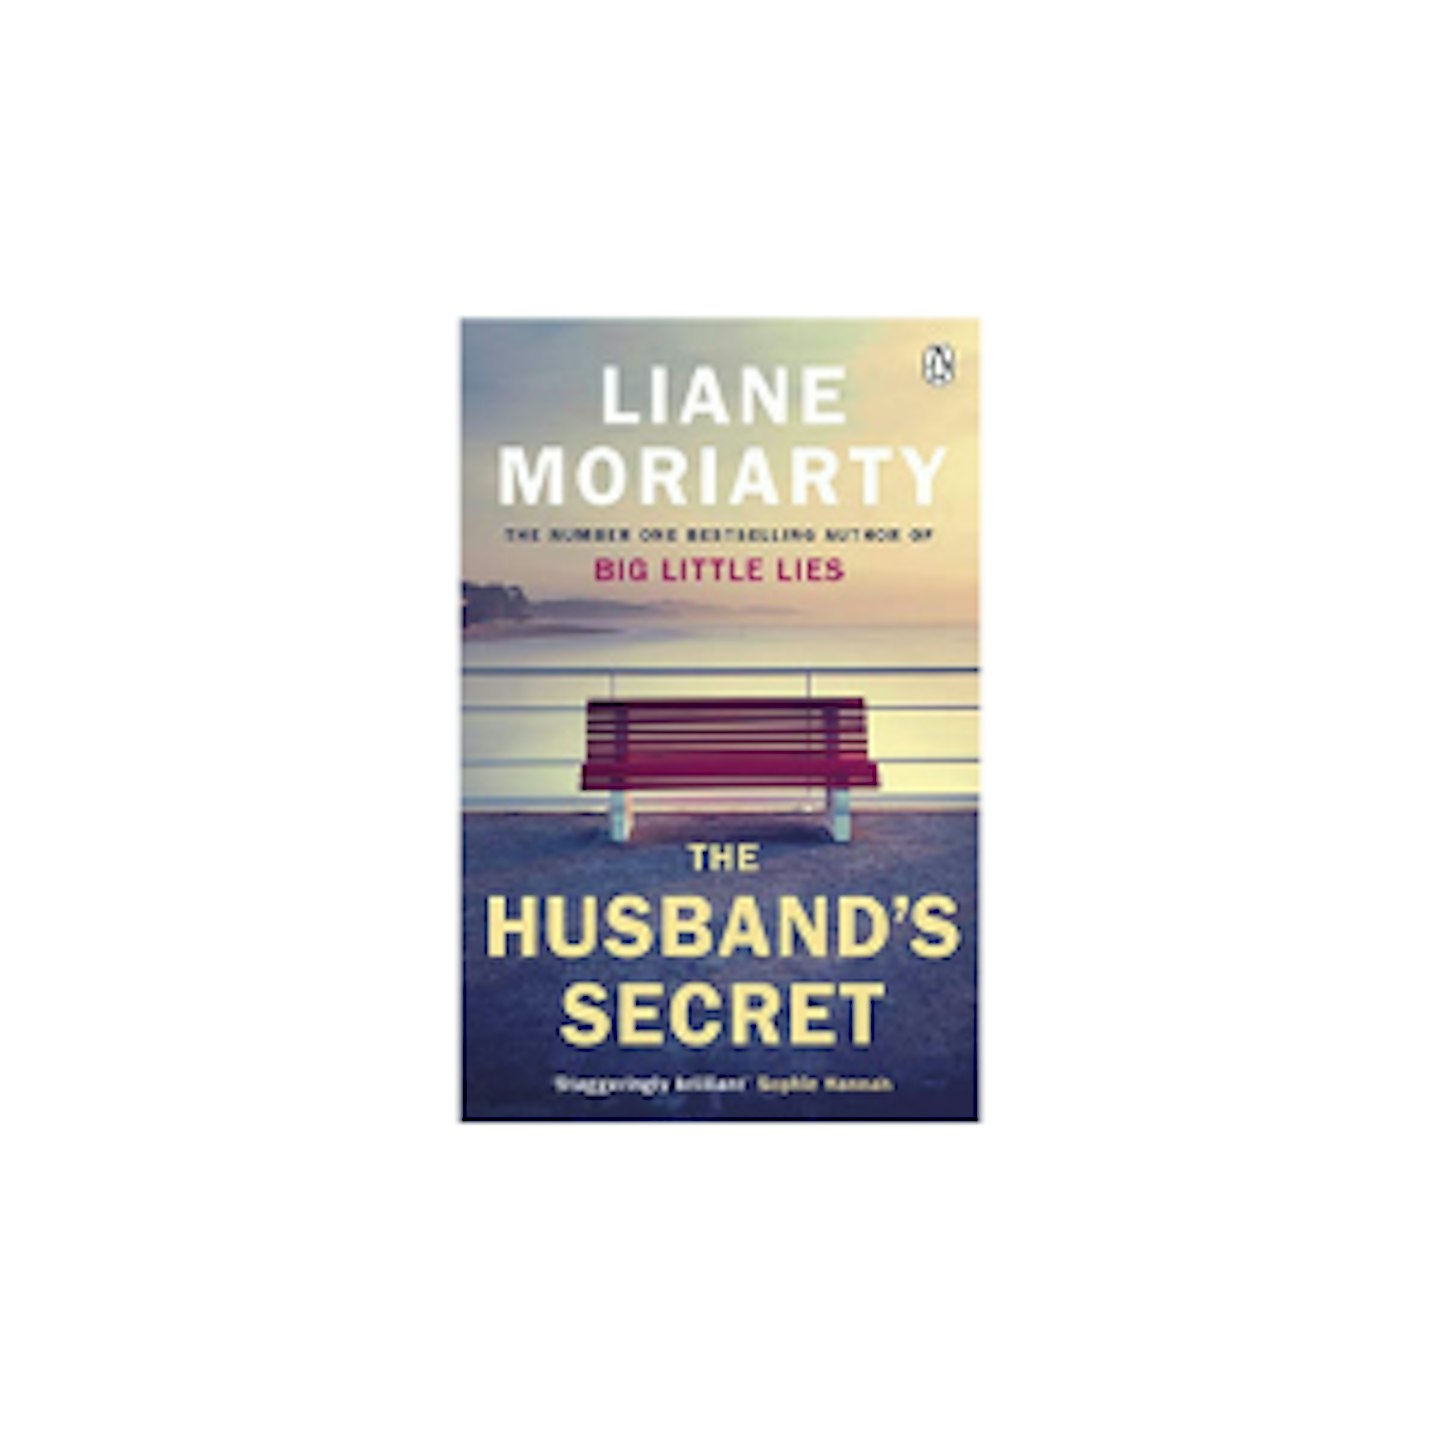 The Husband's Secret: The multi-million copy bestseller that launched the author of HBO’s Big Little Lies Kindle Edition